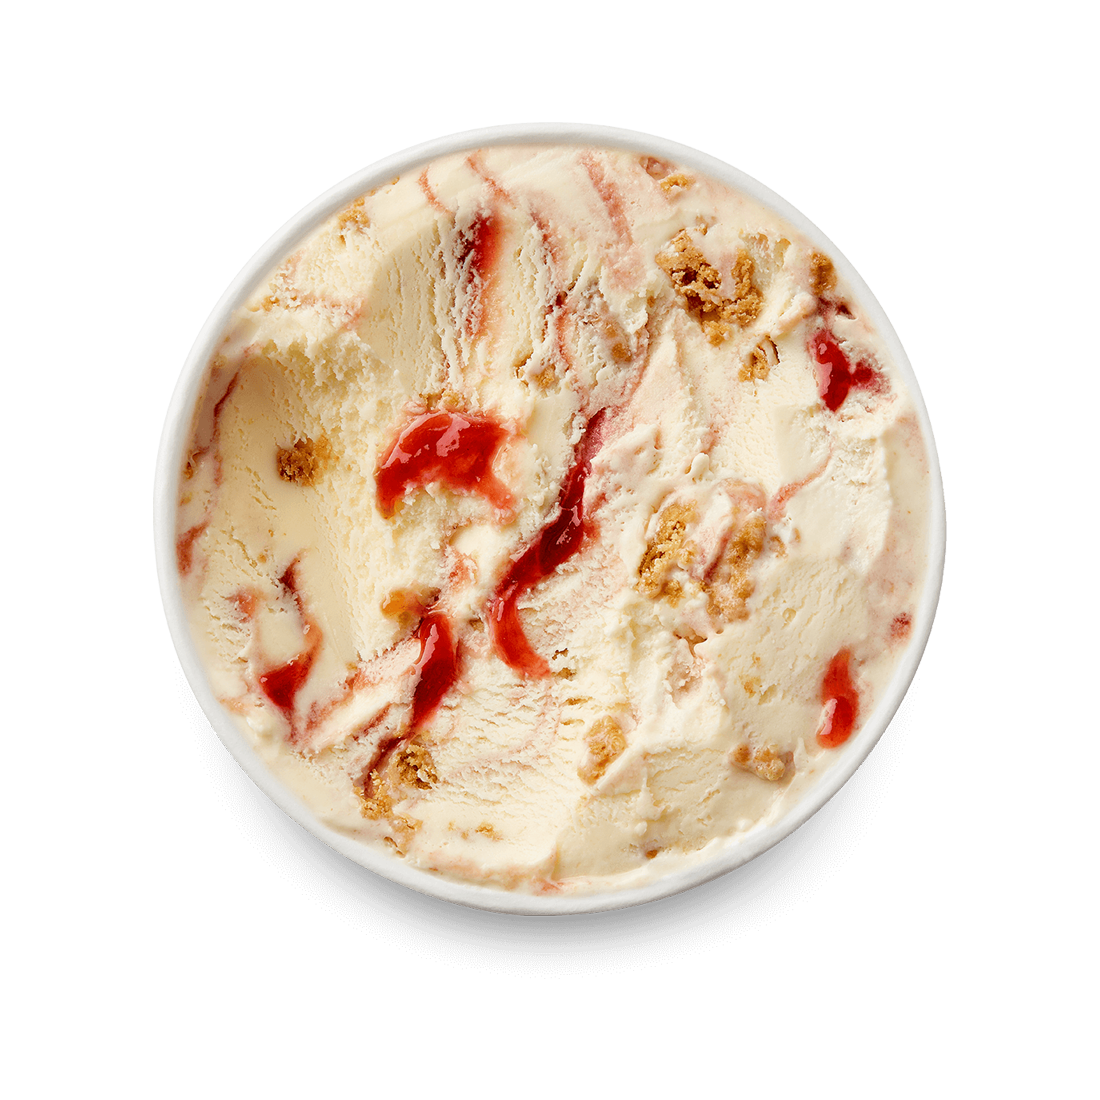 strawberry cheesecake pint lid off